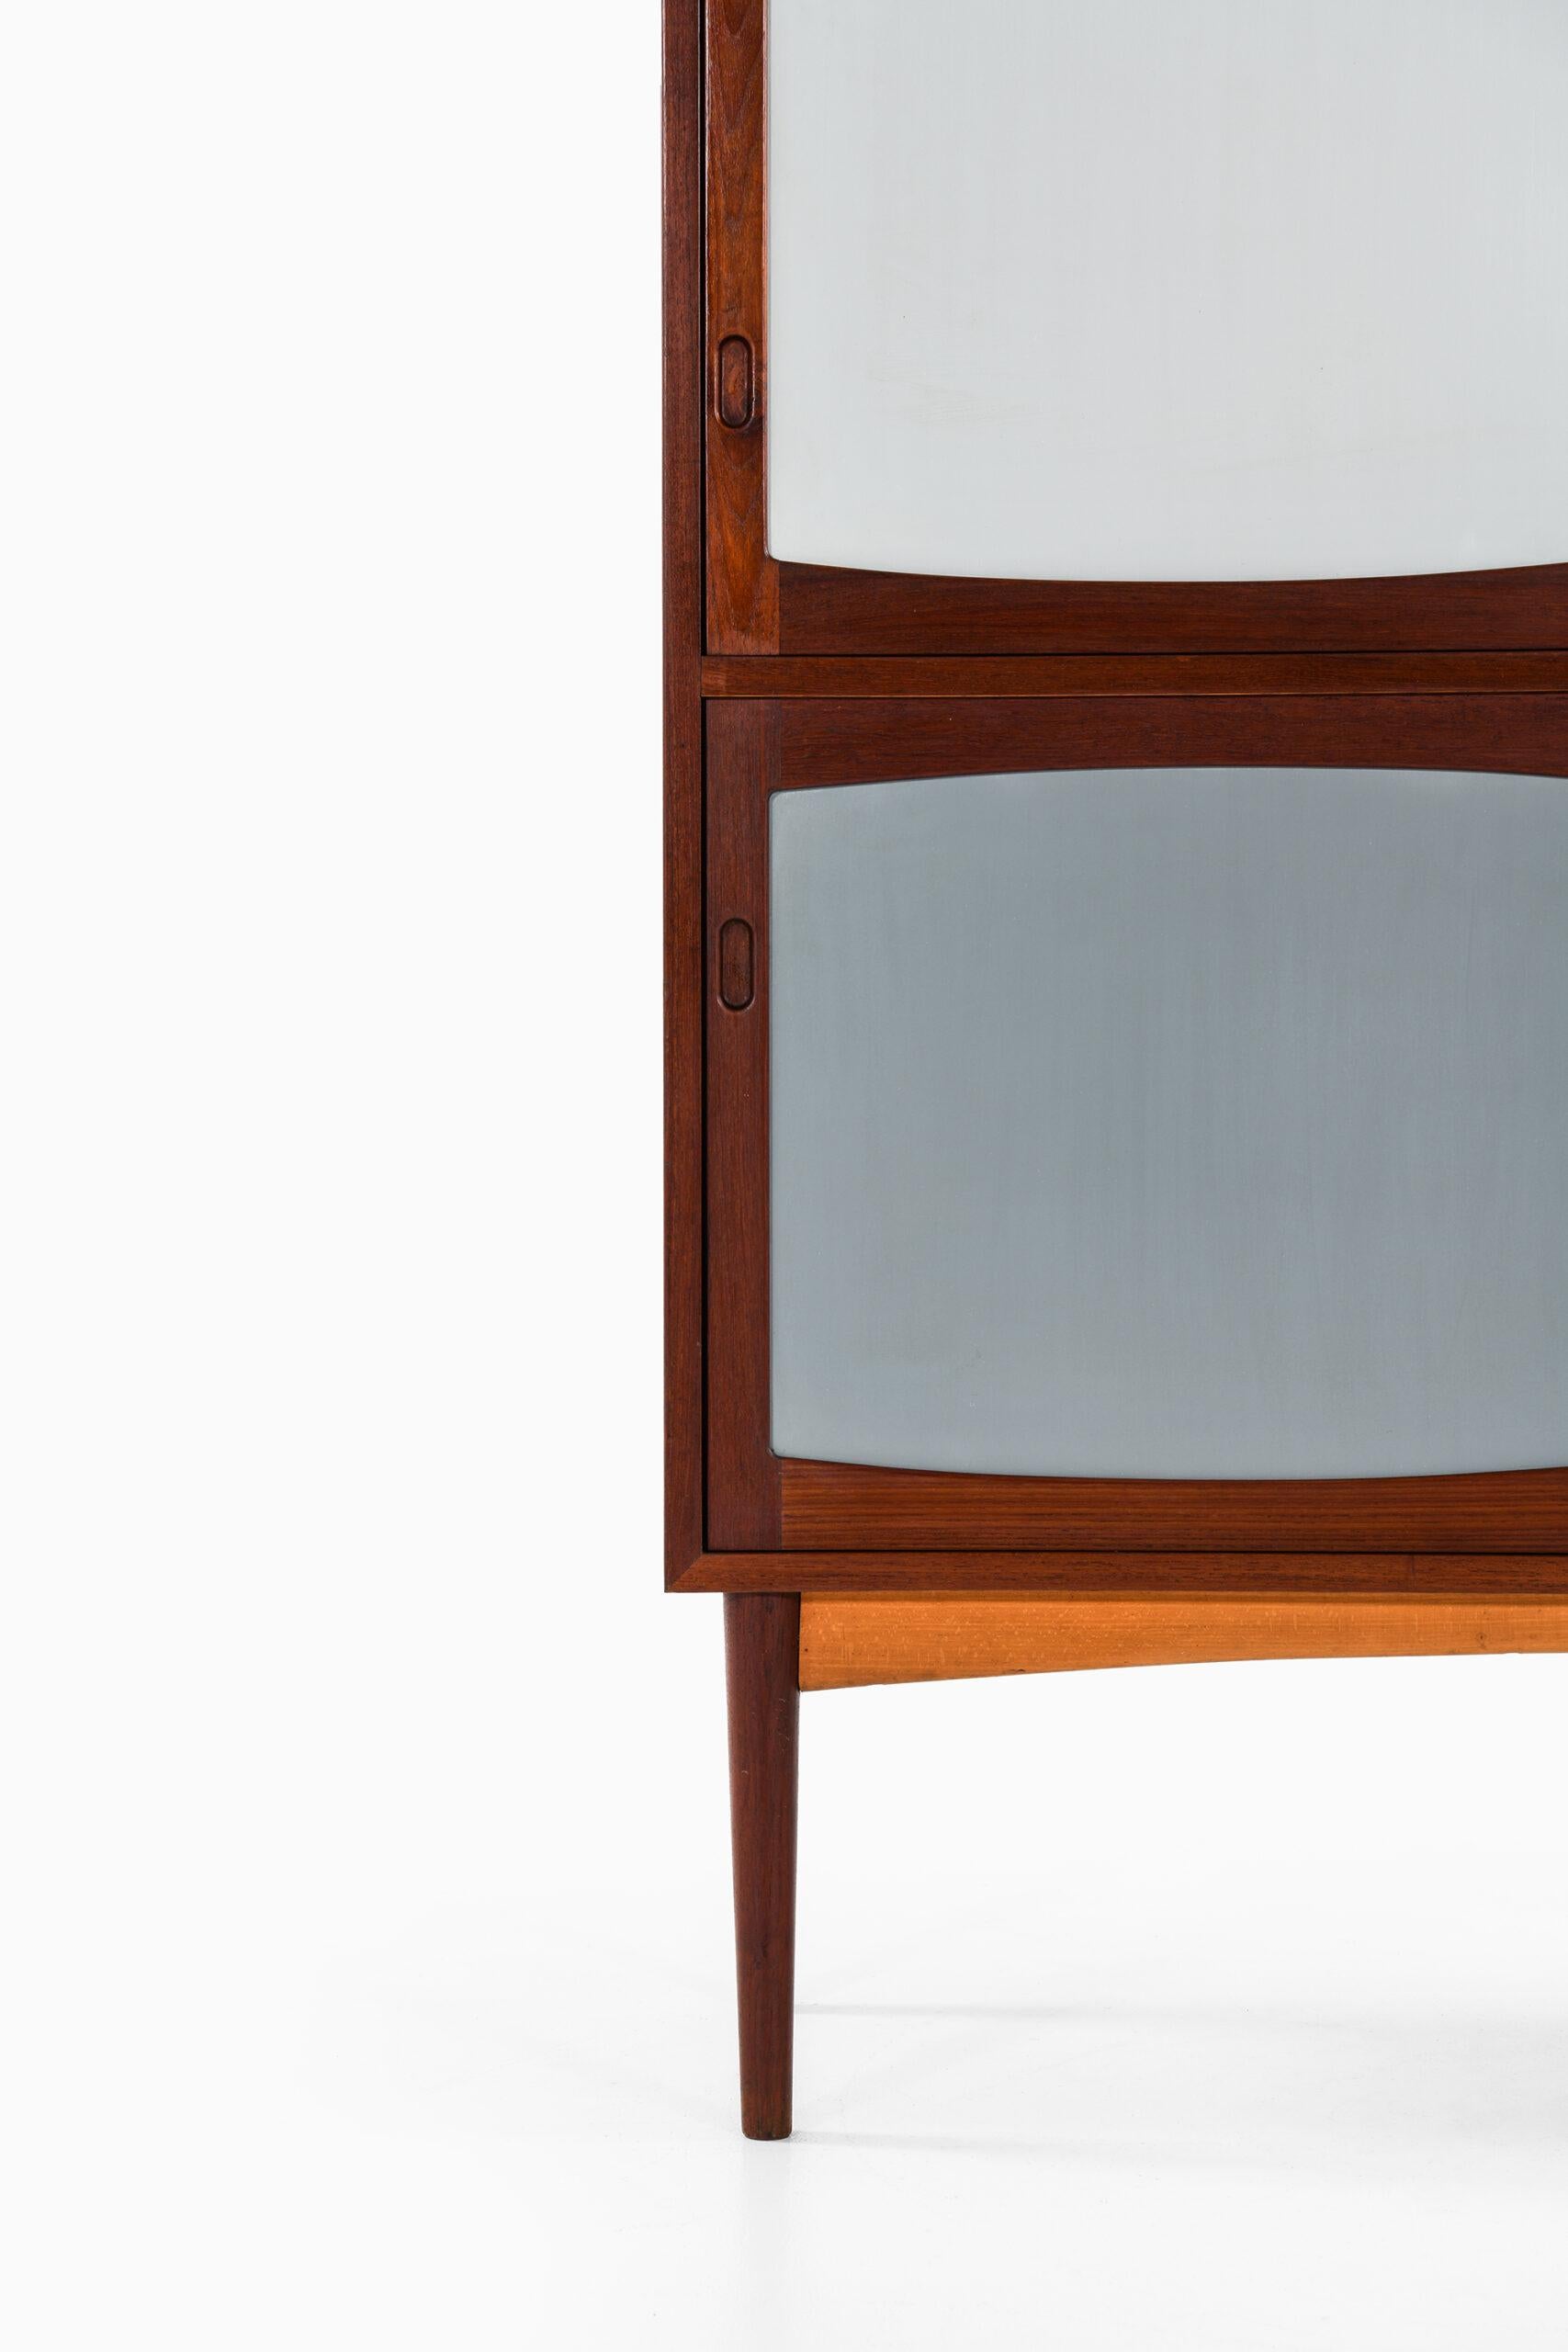 Rare cabinet by unknown designer. Produced in Denmark.